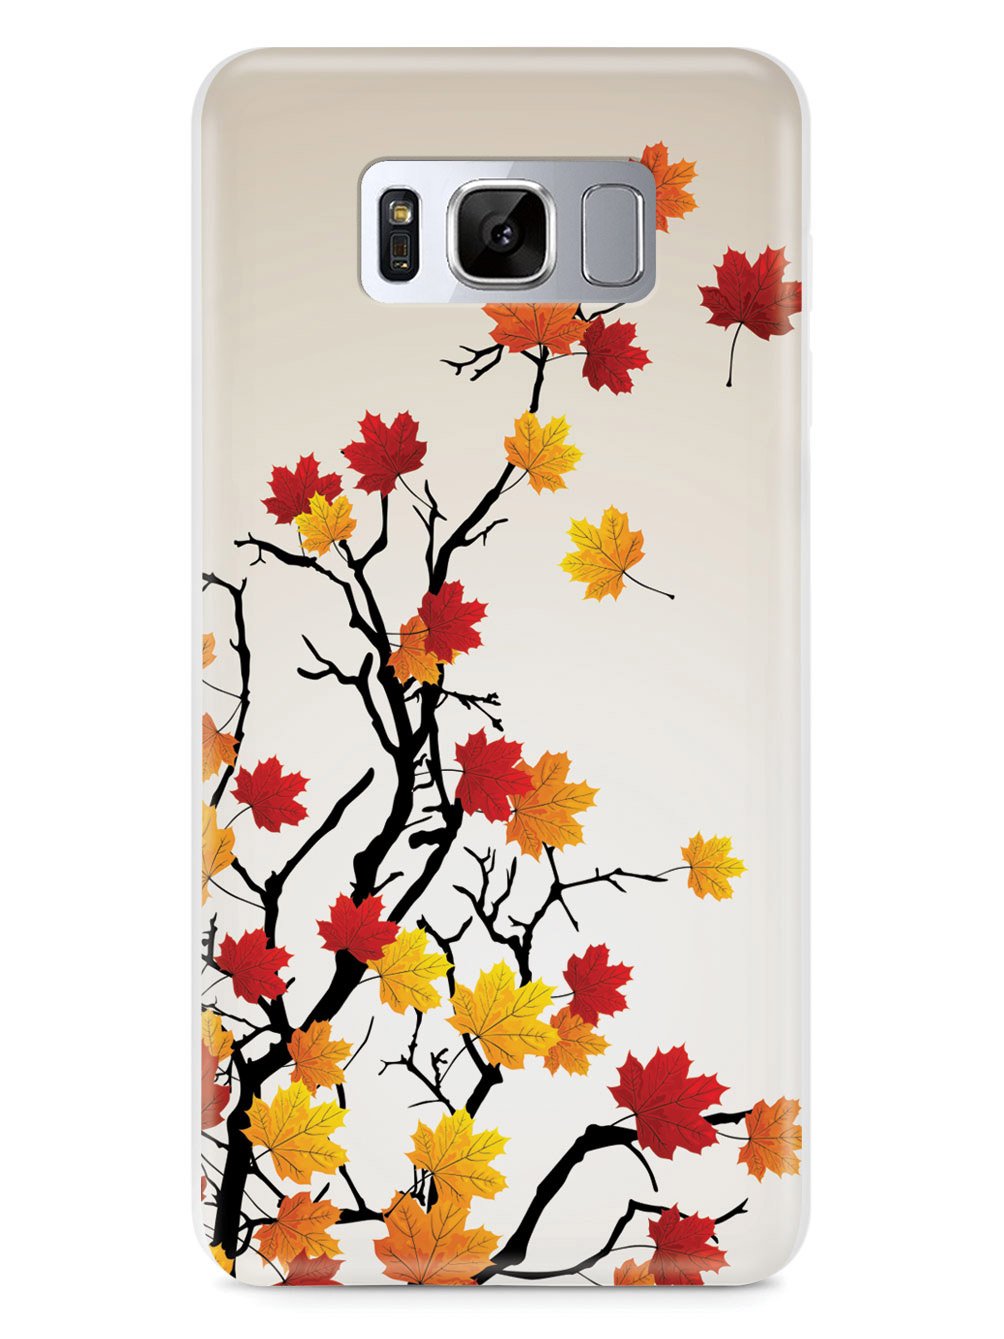 Autumn Leaves on Branches Case